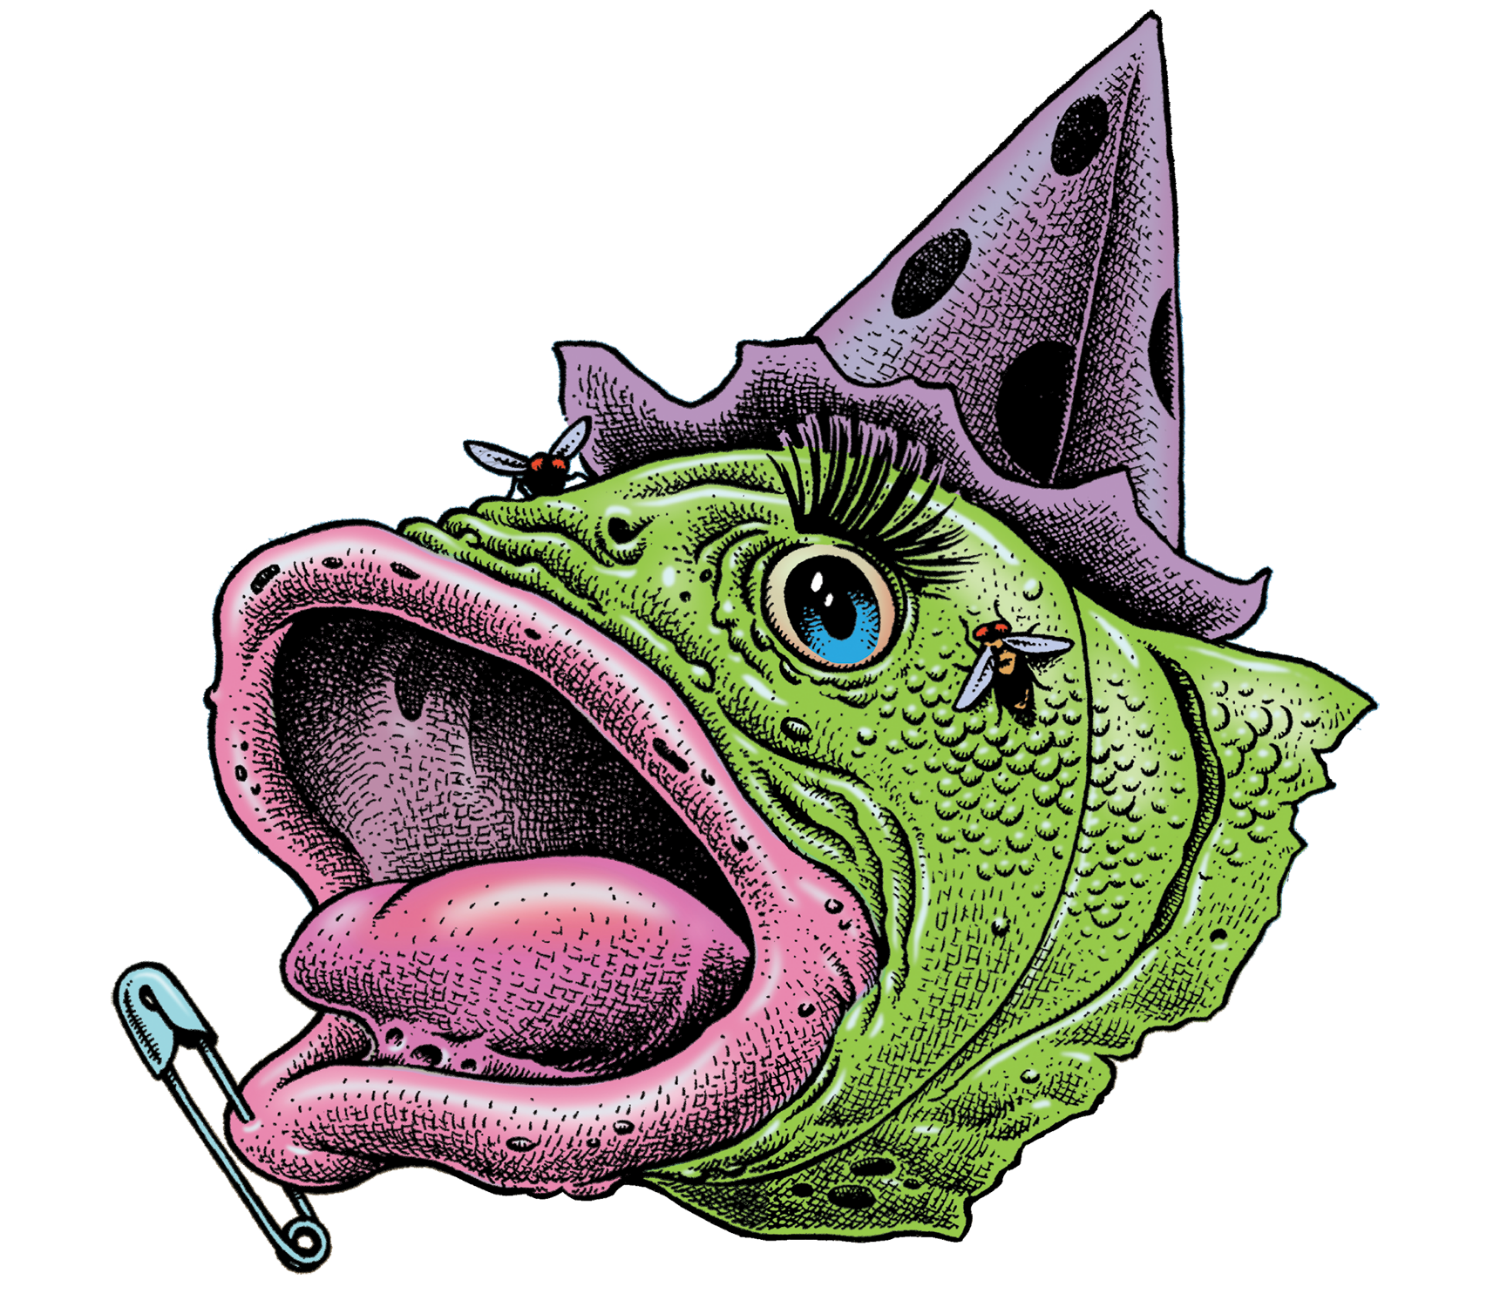 ‘Covered in Punk’ Fish Head illustrated by Stephen Blickenstaff. © 2018 Caf Muzeck, LLC. All Rights Reserved